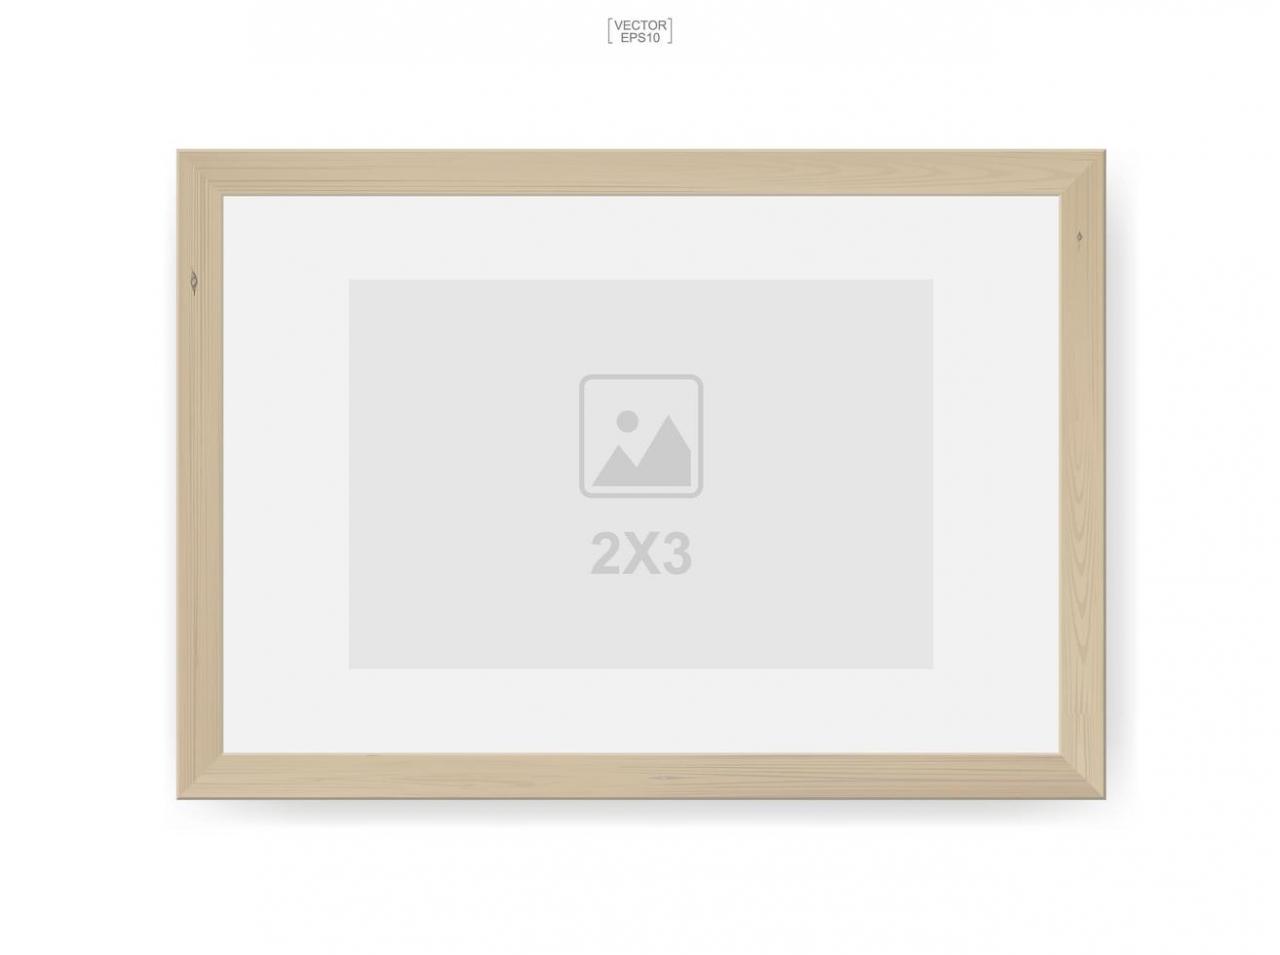 2x3 wooden photo frame or picture frame vector